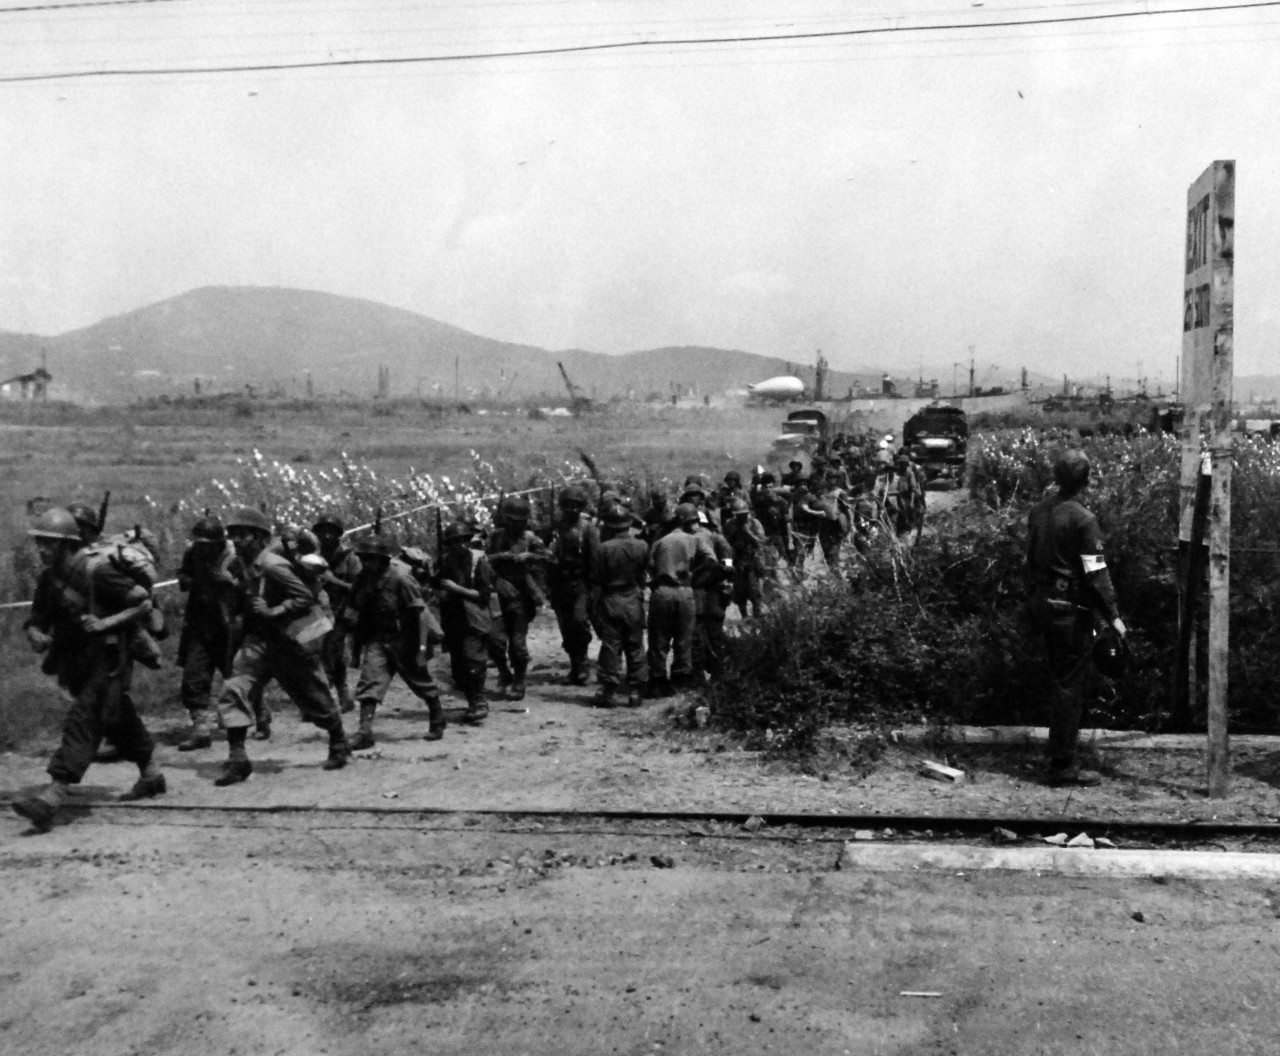 80-G-242118:   Invasion of Southern France, August 1944.     French troops landing in Southern France break into a dog trot in their eagerness to join their countrymen at the front.   Photographed by crewmember of USS Catoctin (AGC 5), 16 August 1944.  .  Official U.S. Navy Photograph, now in the collections of the U.S. Navy.   (2014/5/22).